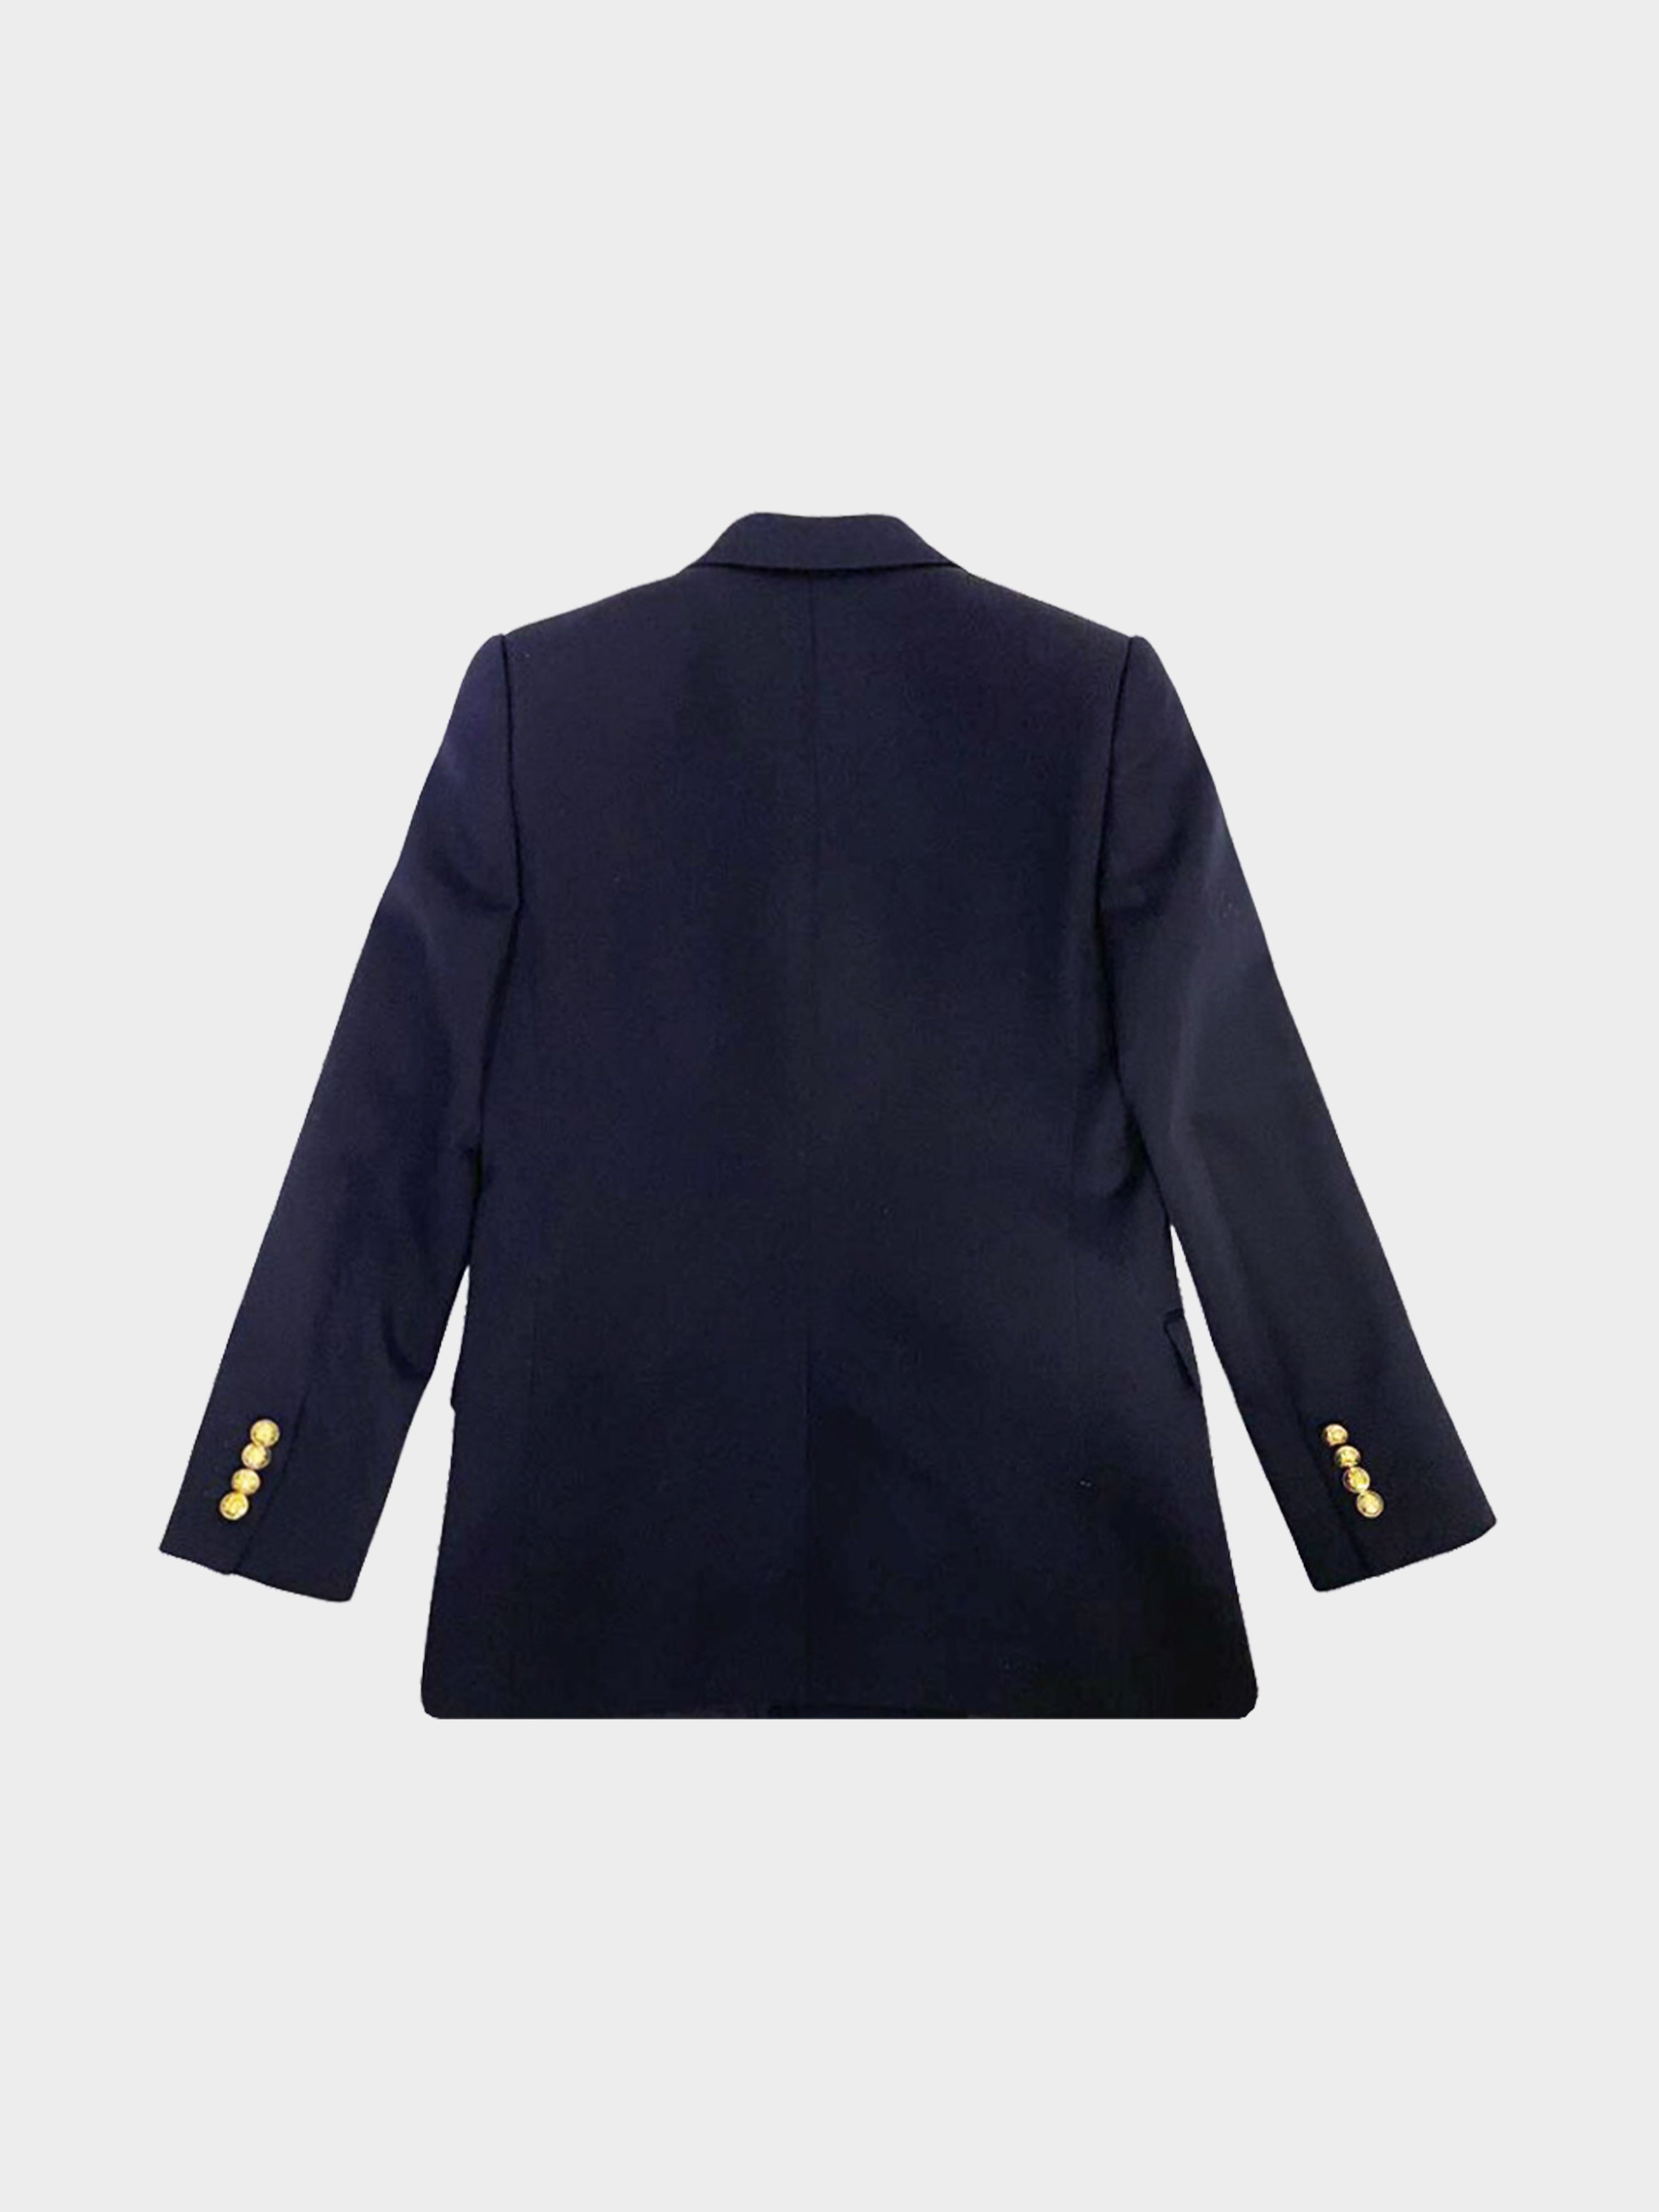 Celine 2020s Navy Double Breasted Long Jacket